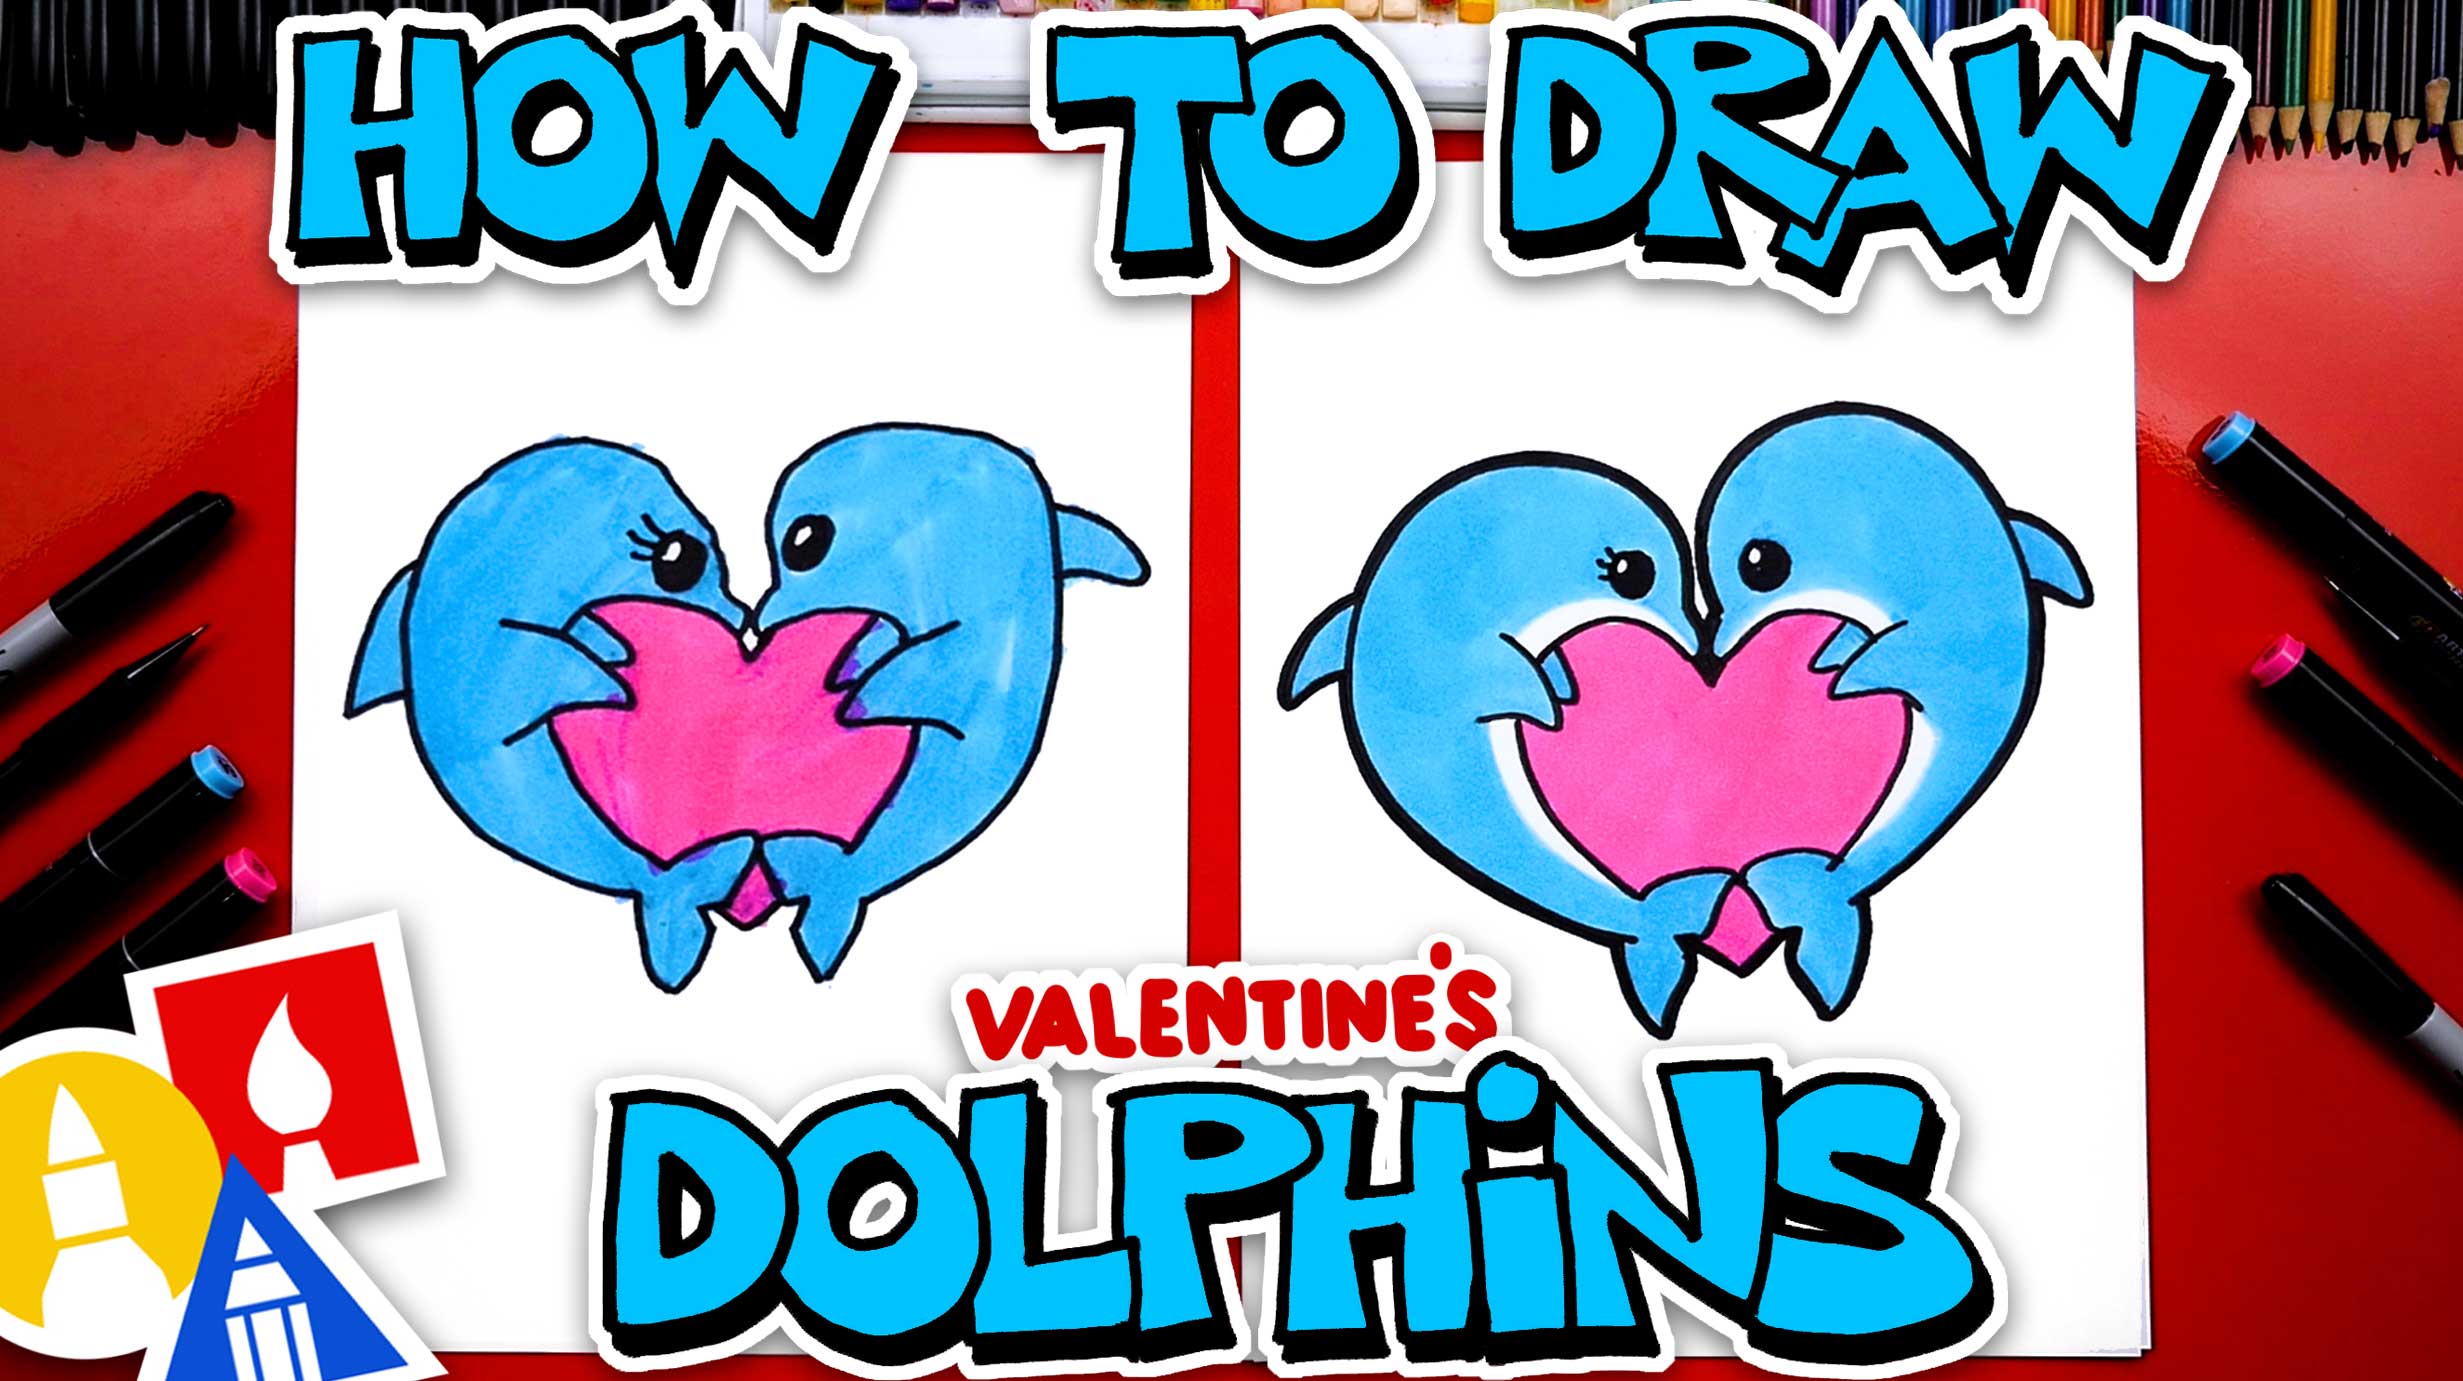 https://artforkidshub.com/wp-content/uploads/2023/02/How-To-Draw-Valentines-Day-Dolphins-thumbnail.jpg